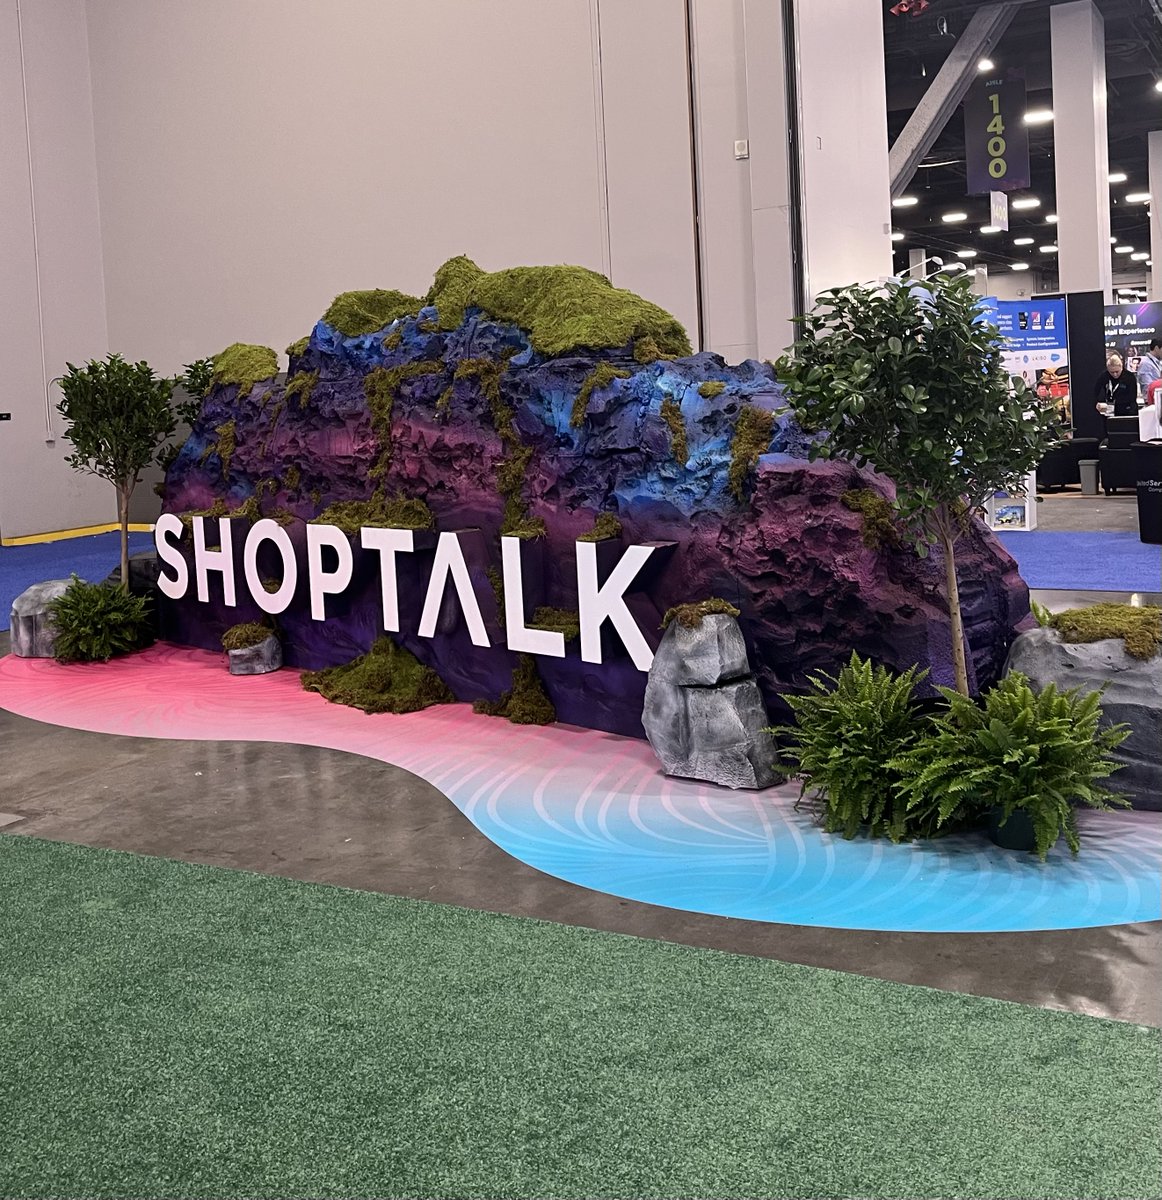 That's a wrap @shoptalk 2024! The
@doofinder team can confirm that our second time around was just as special as the first 🎉

Big thank you to everyone we had the chance to meet - It was definitely the highlight of this experience! #Shoptalk2024 #ecommerce #shoptalk #AI